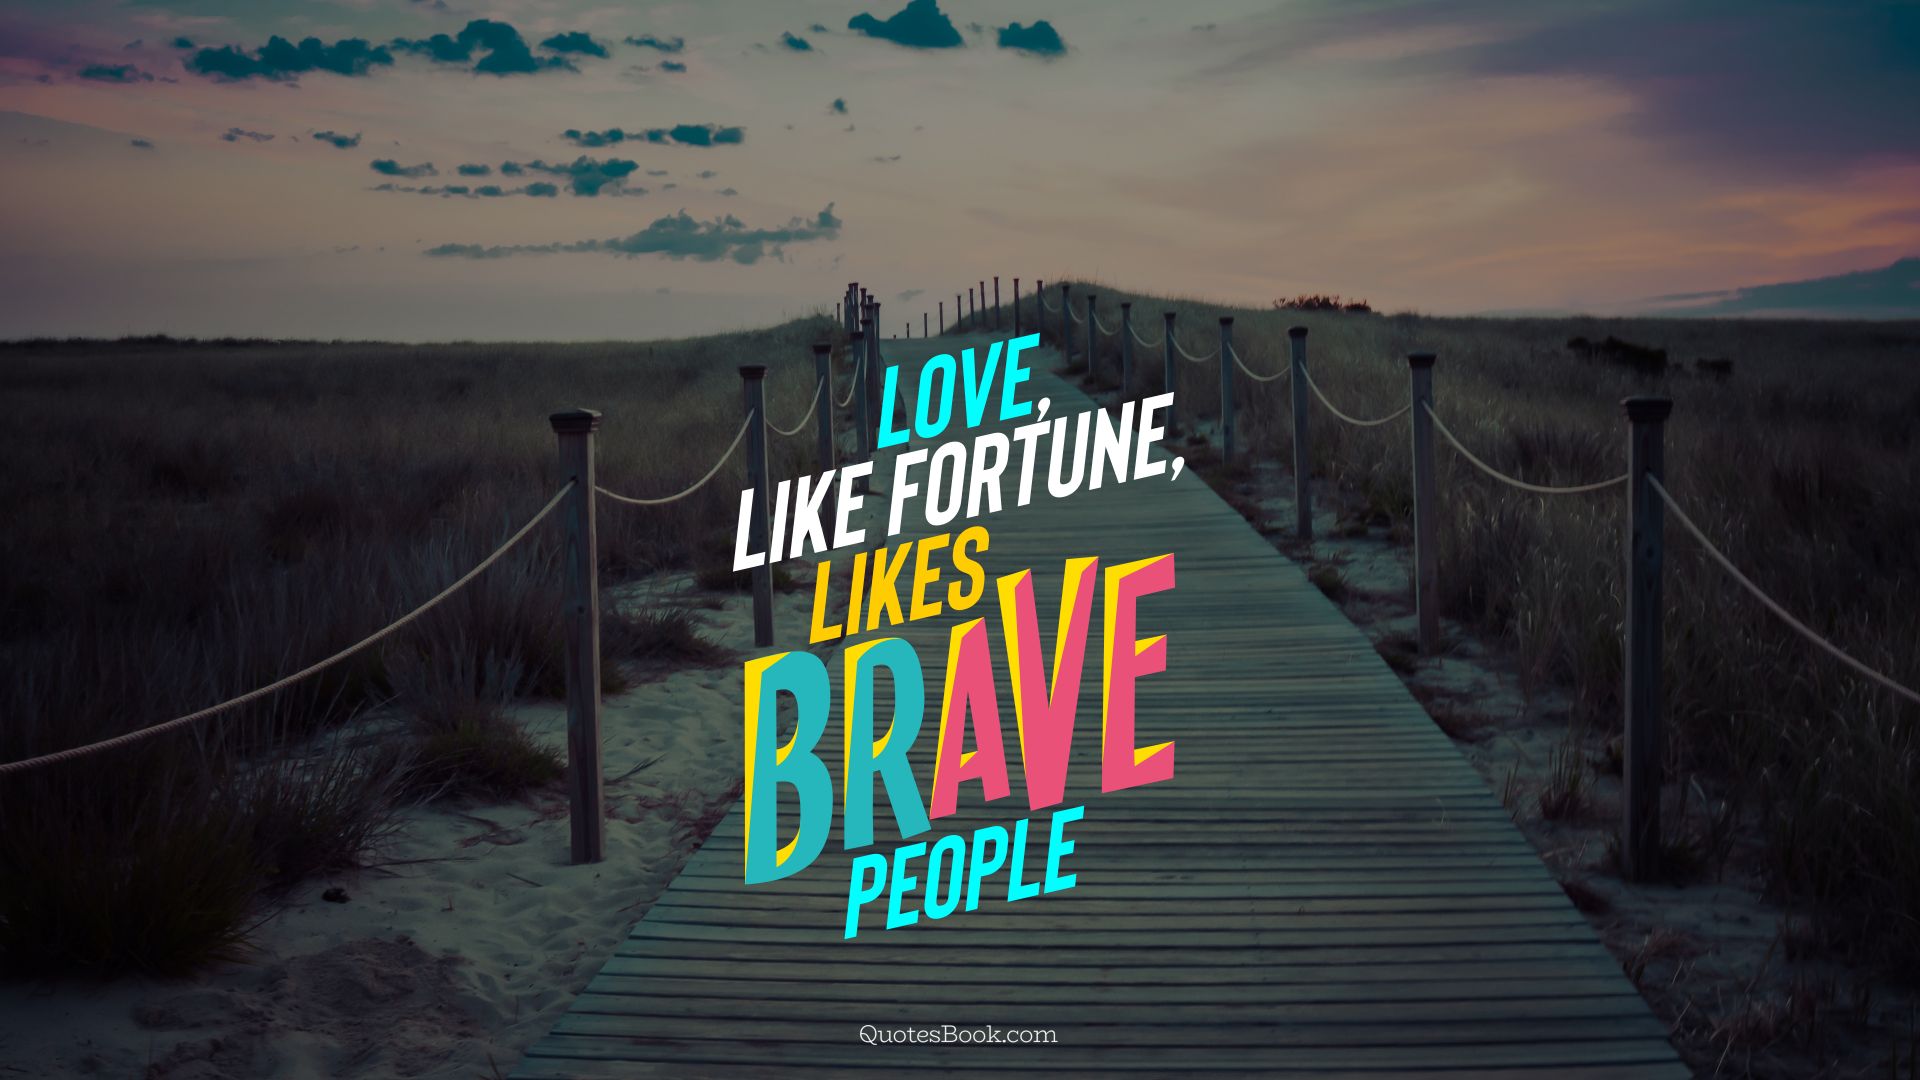 Love, like fortune, likes brave people. - Quote by QuotesBook